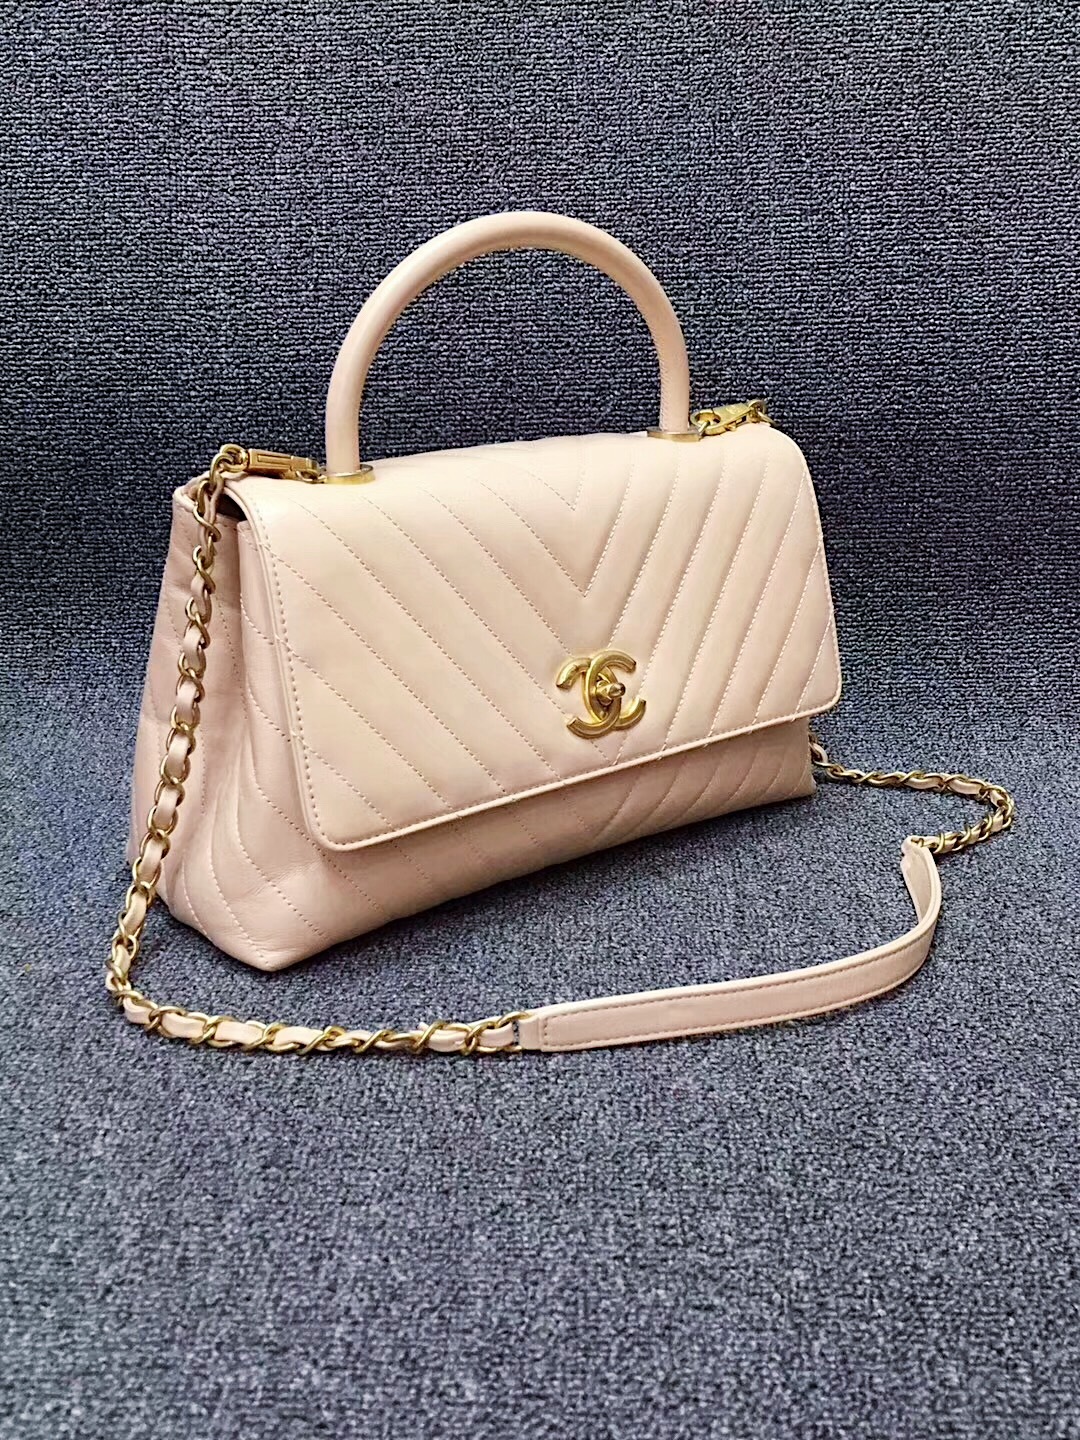 100% AUTHENTIC CHANEL 2017 CHEVRON QUILTED CALFSKIN COCO HANDLE BAG BEIGE GHW- Handbags & Purses